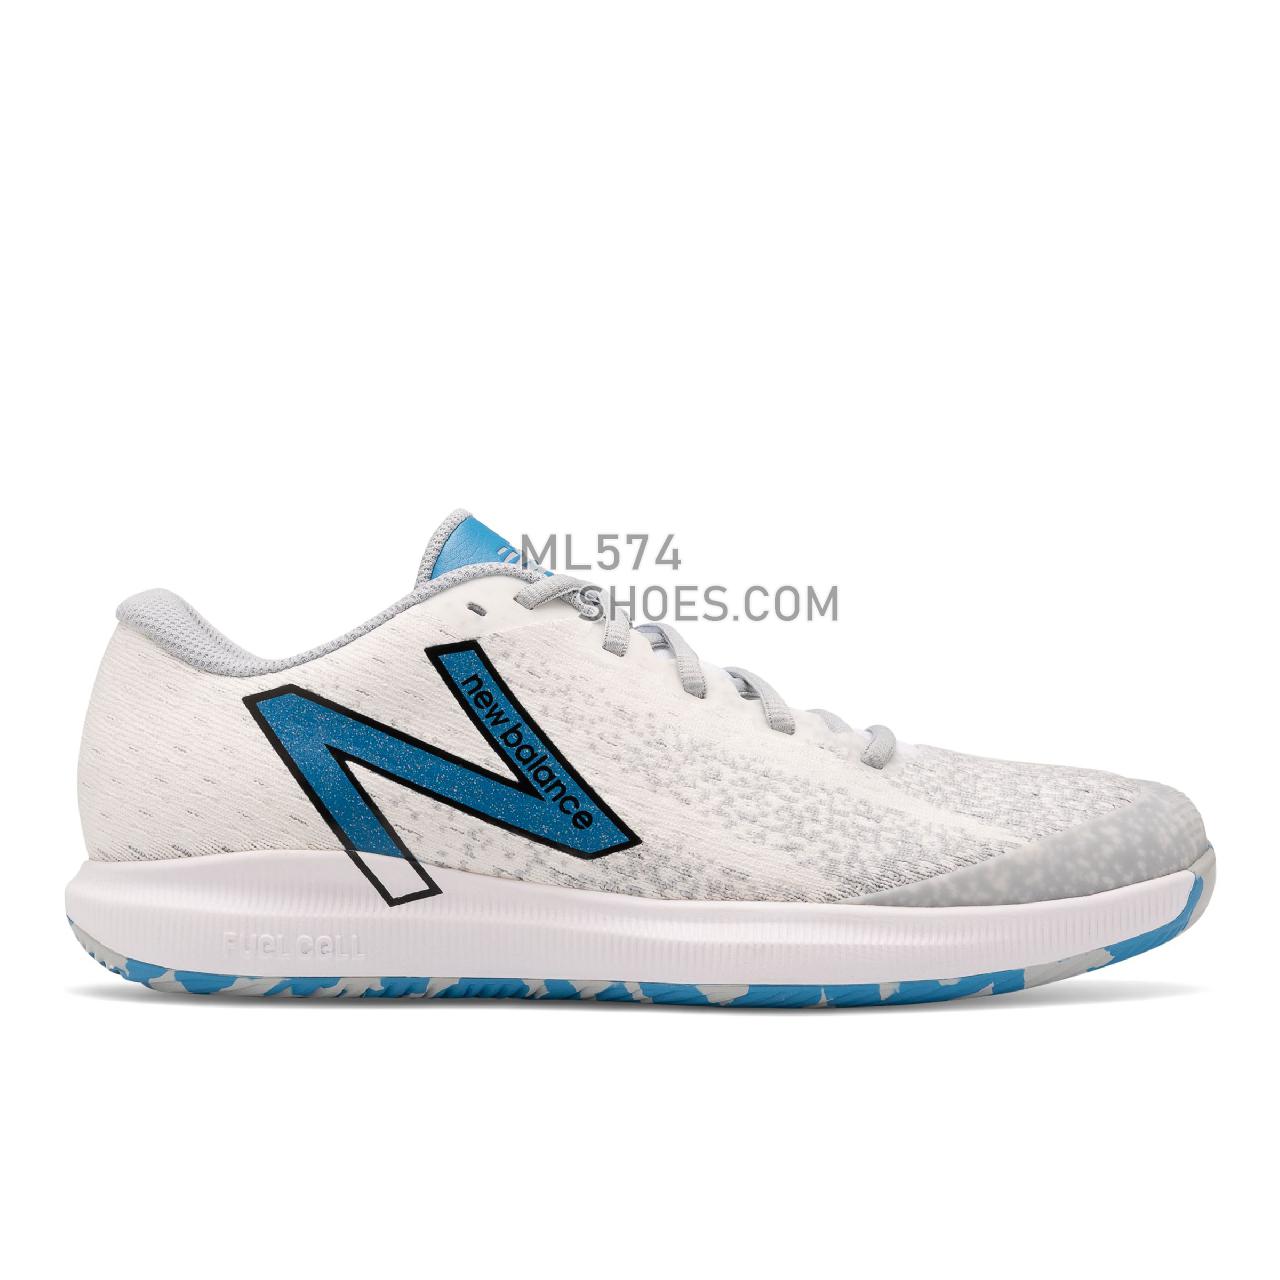 New Balance FuelCell 996v4.5 - Men's Tennis - White with Helium and Sulphur Yellow - MCH996N4